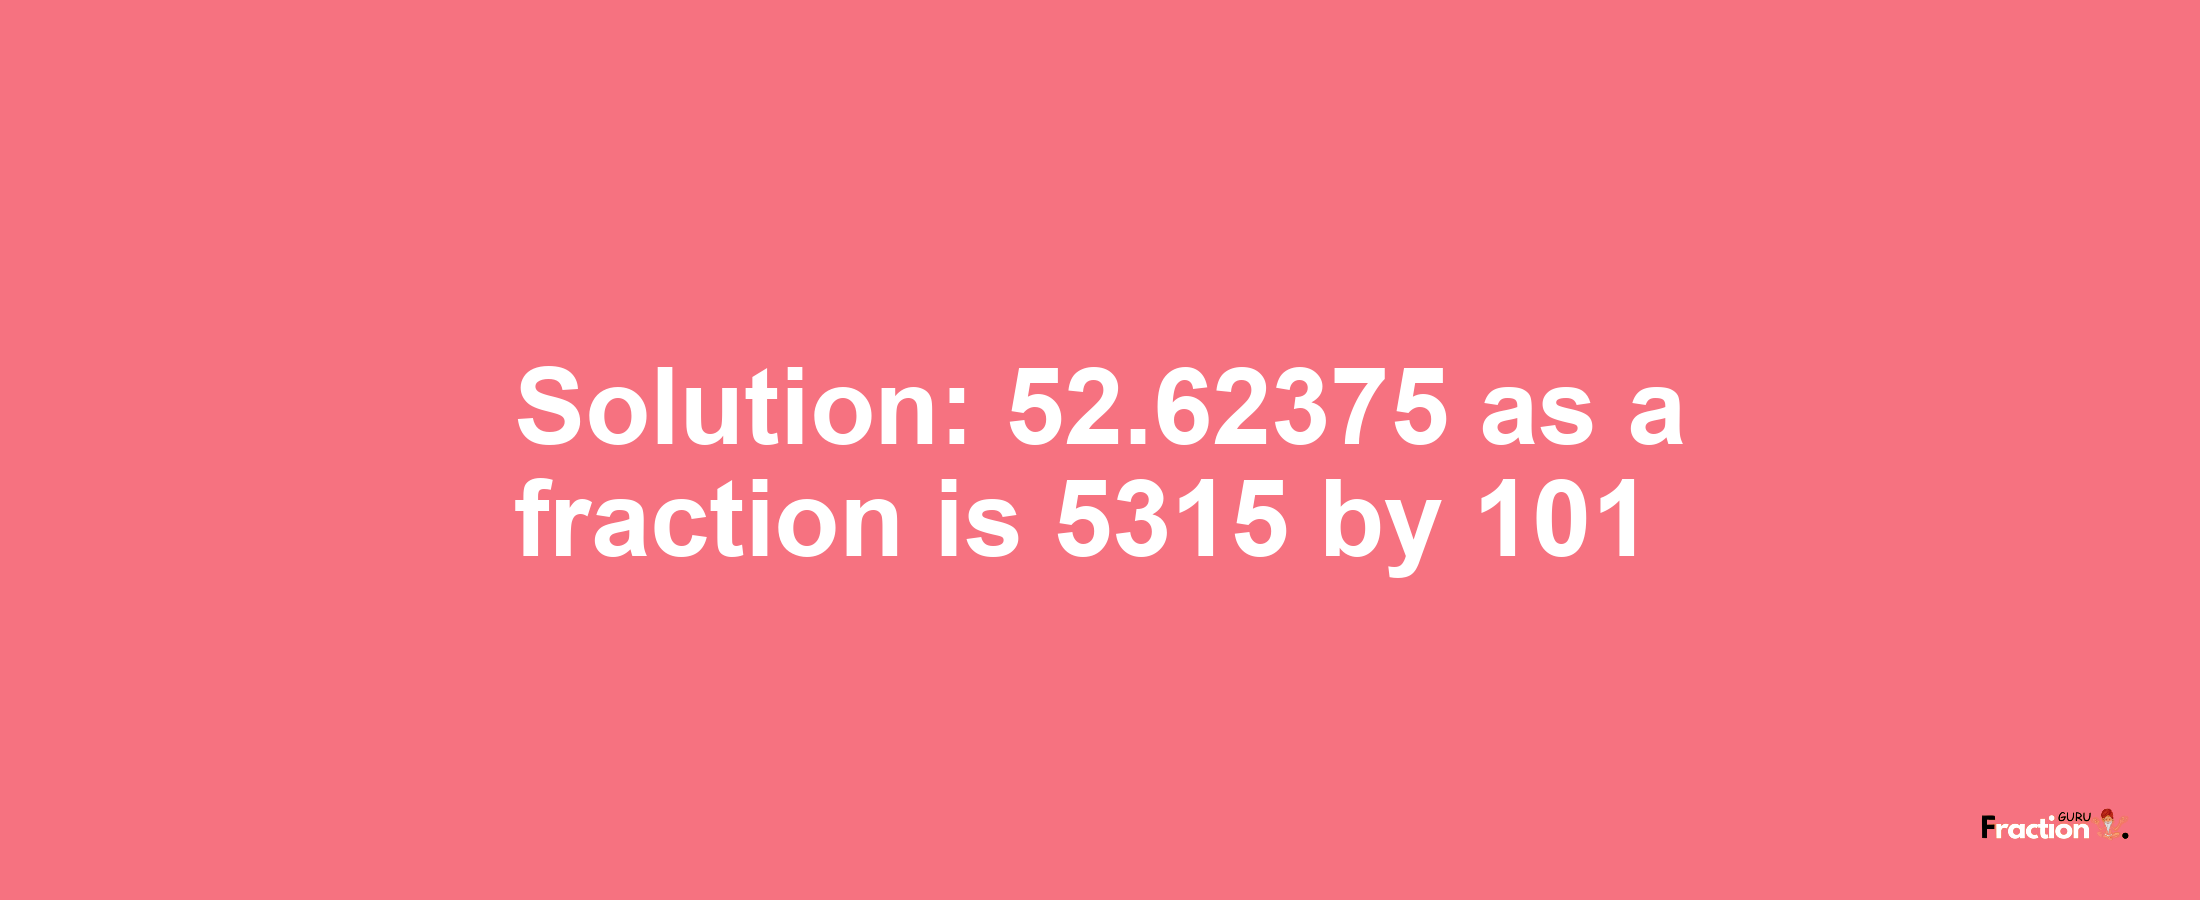 Solution:52.62375 as a fraction is 5315/101